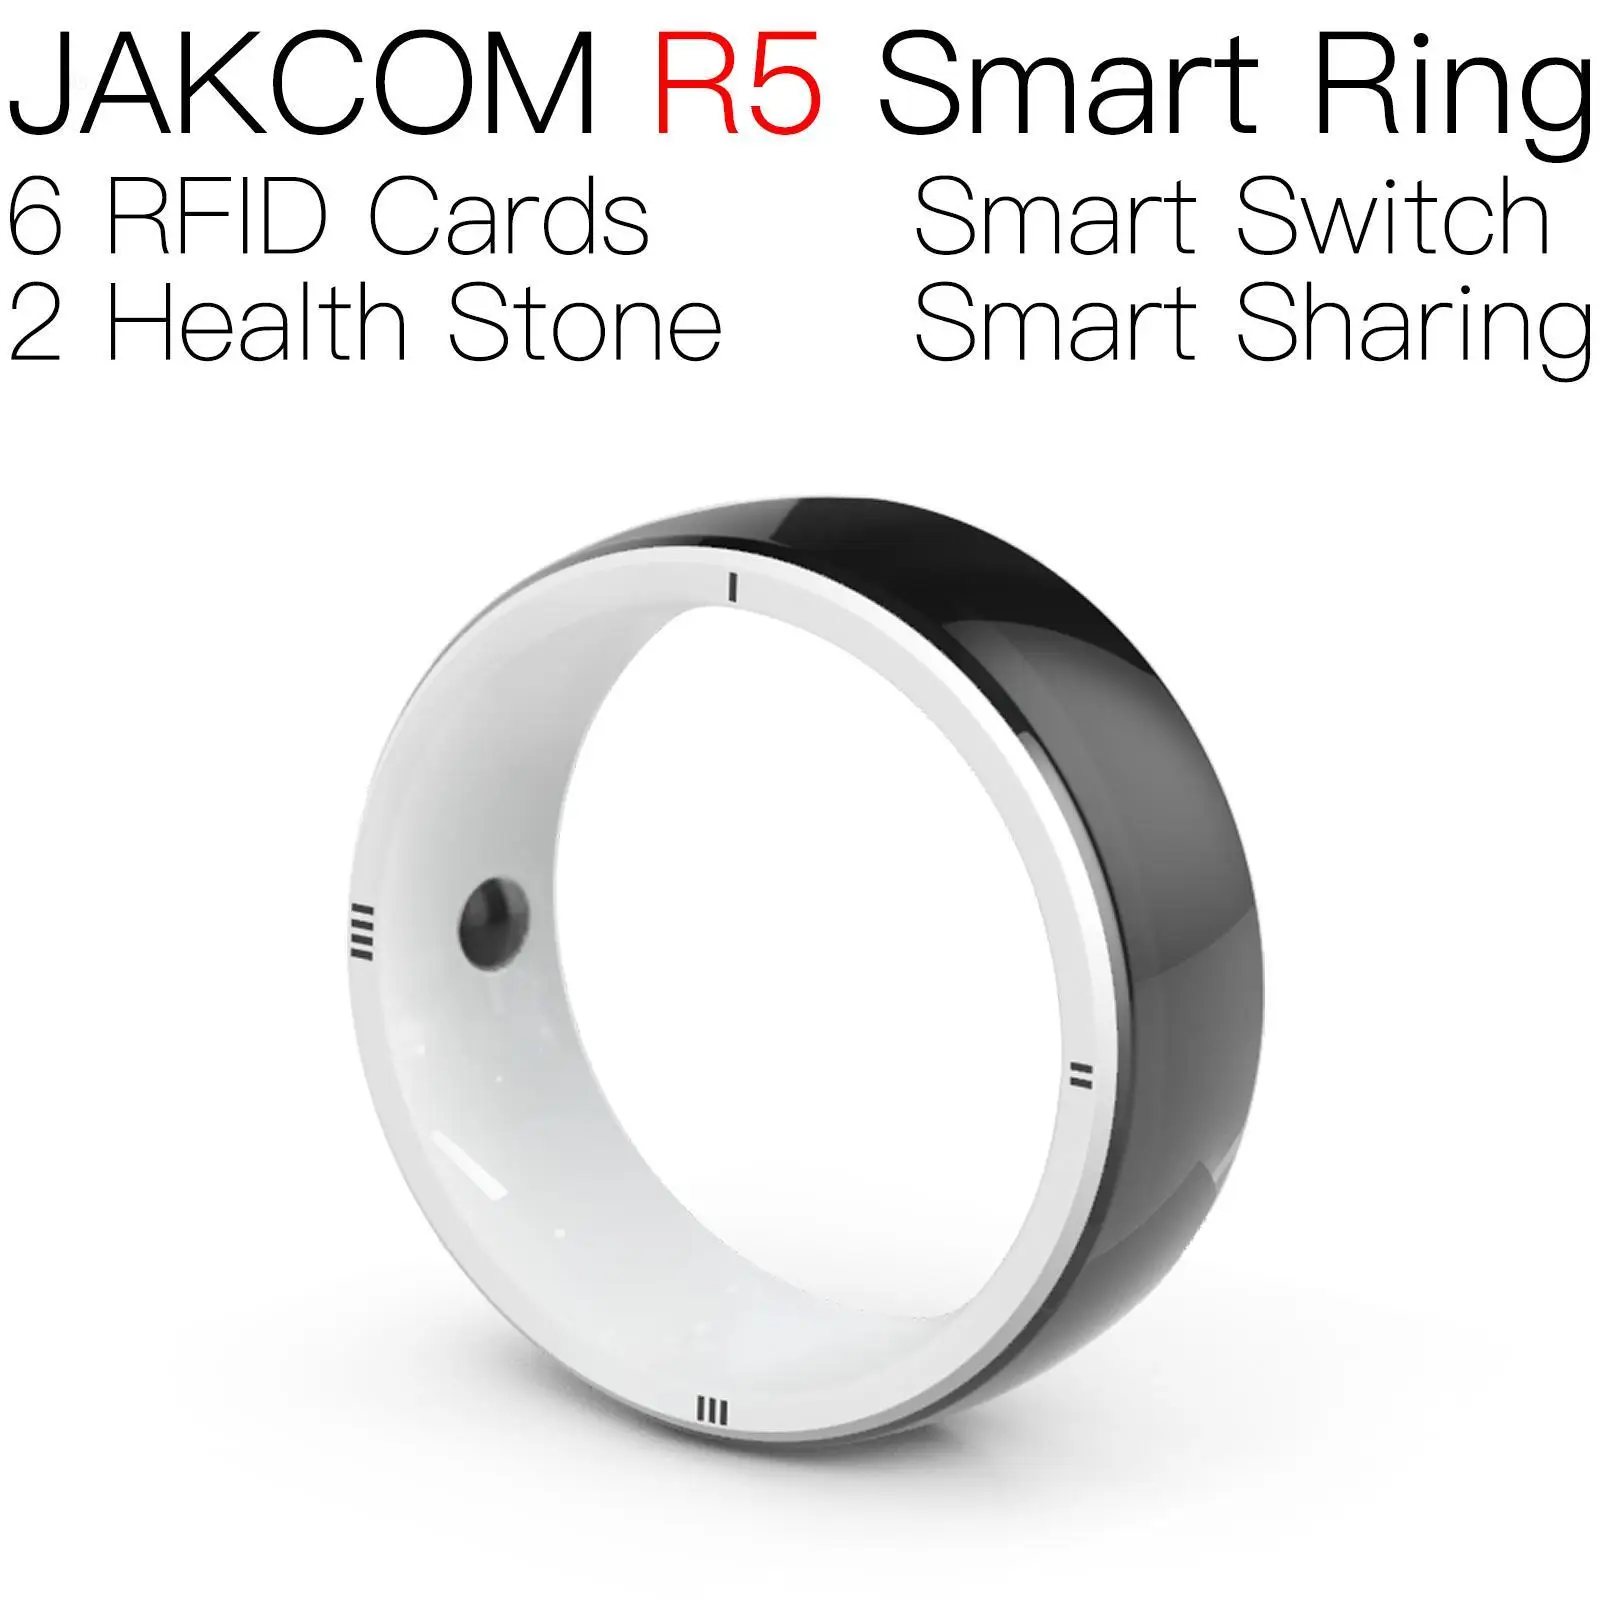 

JAKCOM R5 Smart Ring Nice than rfid ring 125khz rewritable 3f chip unique tag programmable nfc card for android autocollant zip